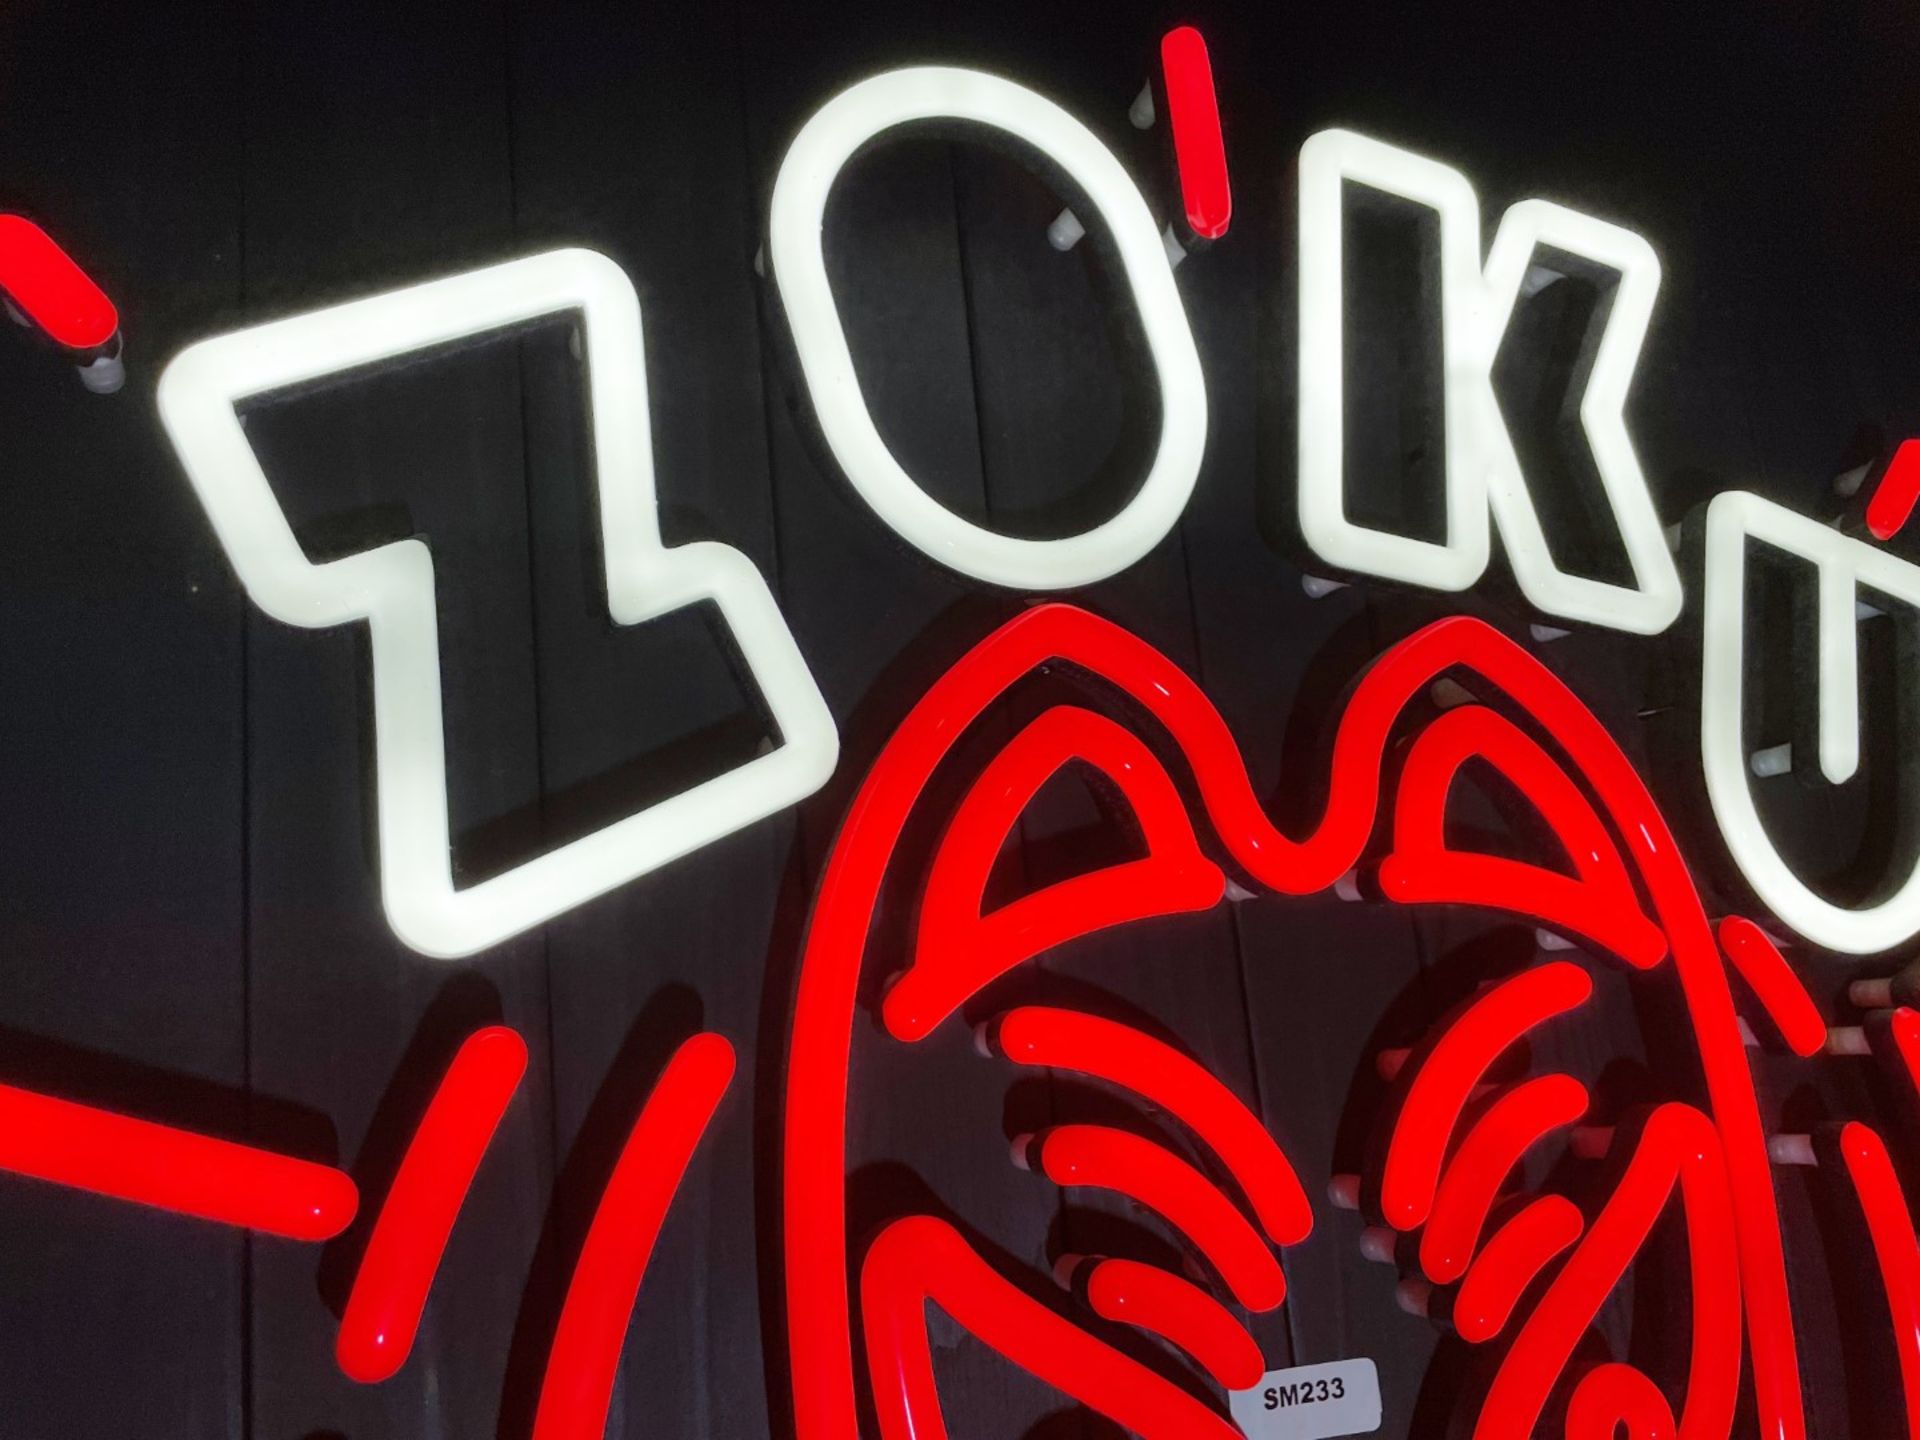 1 x RED NEON Illuminated Wall Sign ZOKU RECORDS Mounted on a Black Wooden Wall Panel - Image 4 of 5